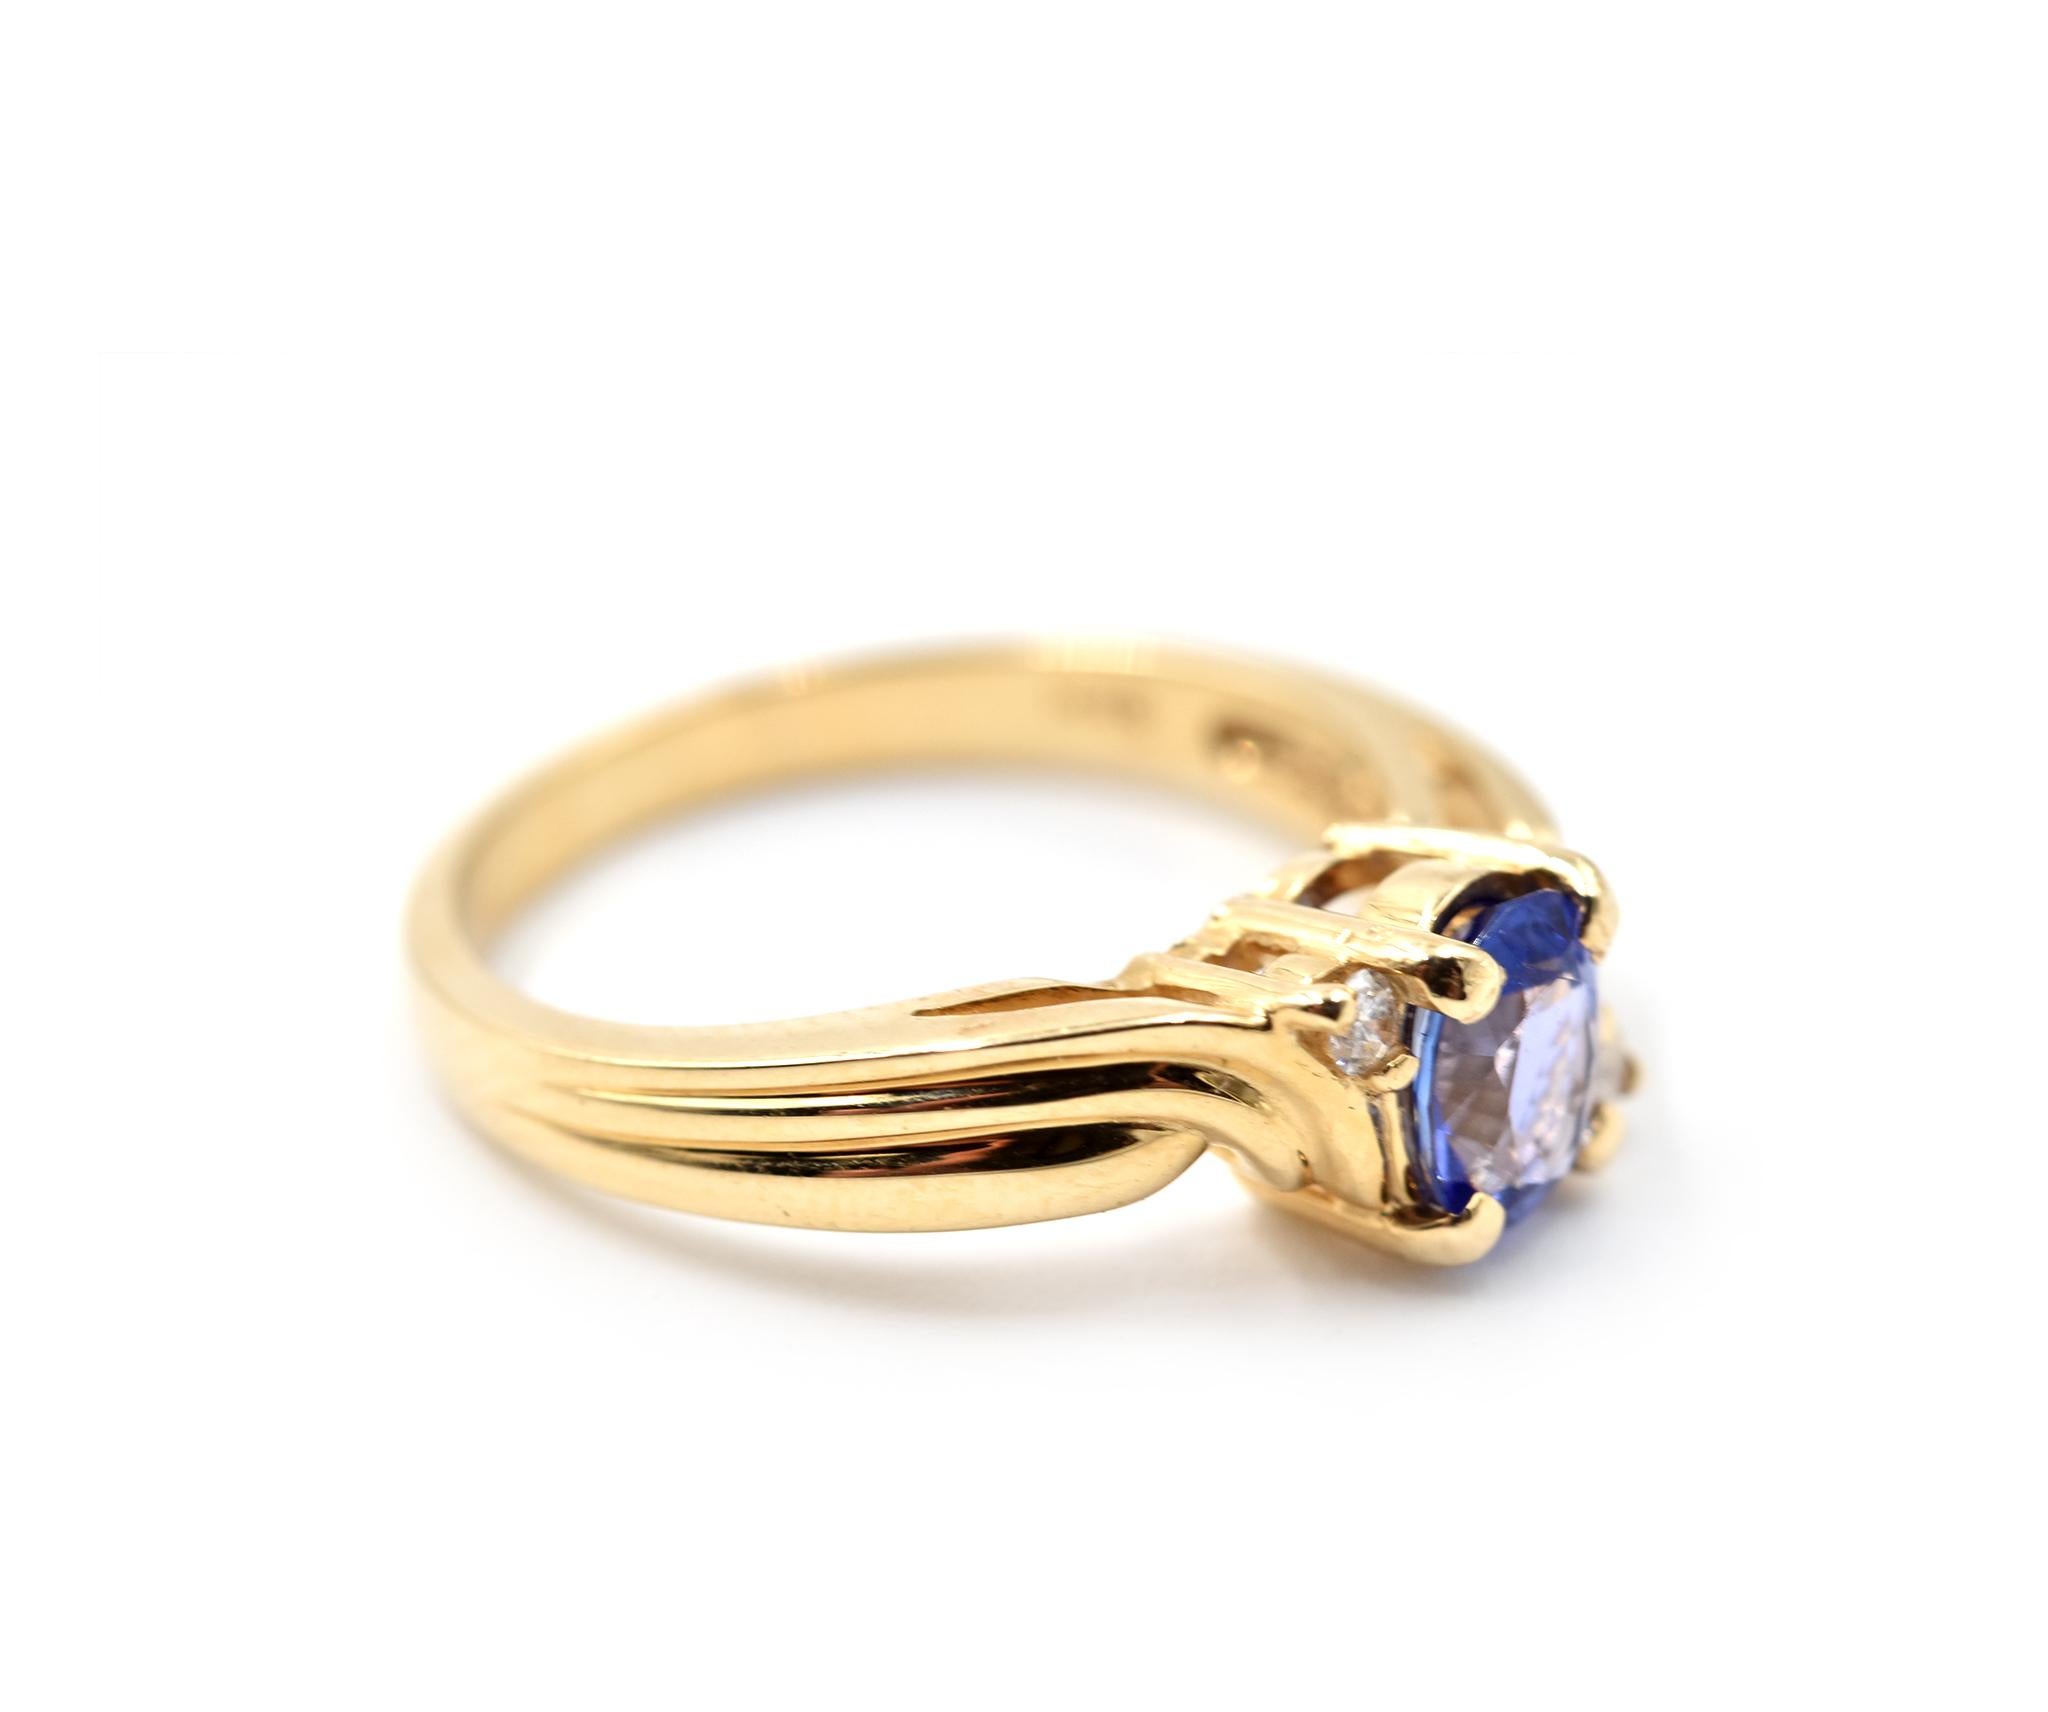 Designer: custom design
Material: 14k white gold
Tanzanite: 0.65 carat oval cut tanzanite
Diamonds: two round brilliant cut = 0.04 carat weight
Color: H
Clarity: SI1-SI2
Ring Size: 6 1/2 (please allow two additional shipping days for sizing